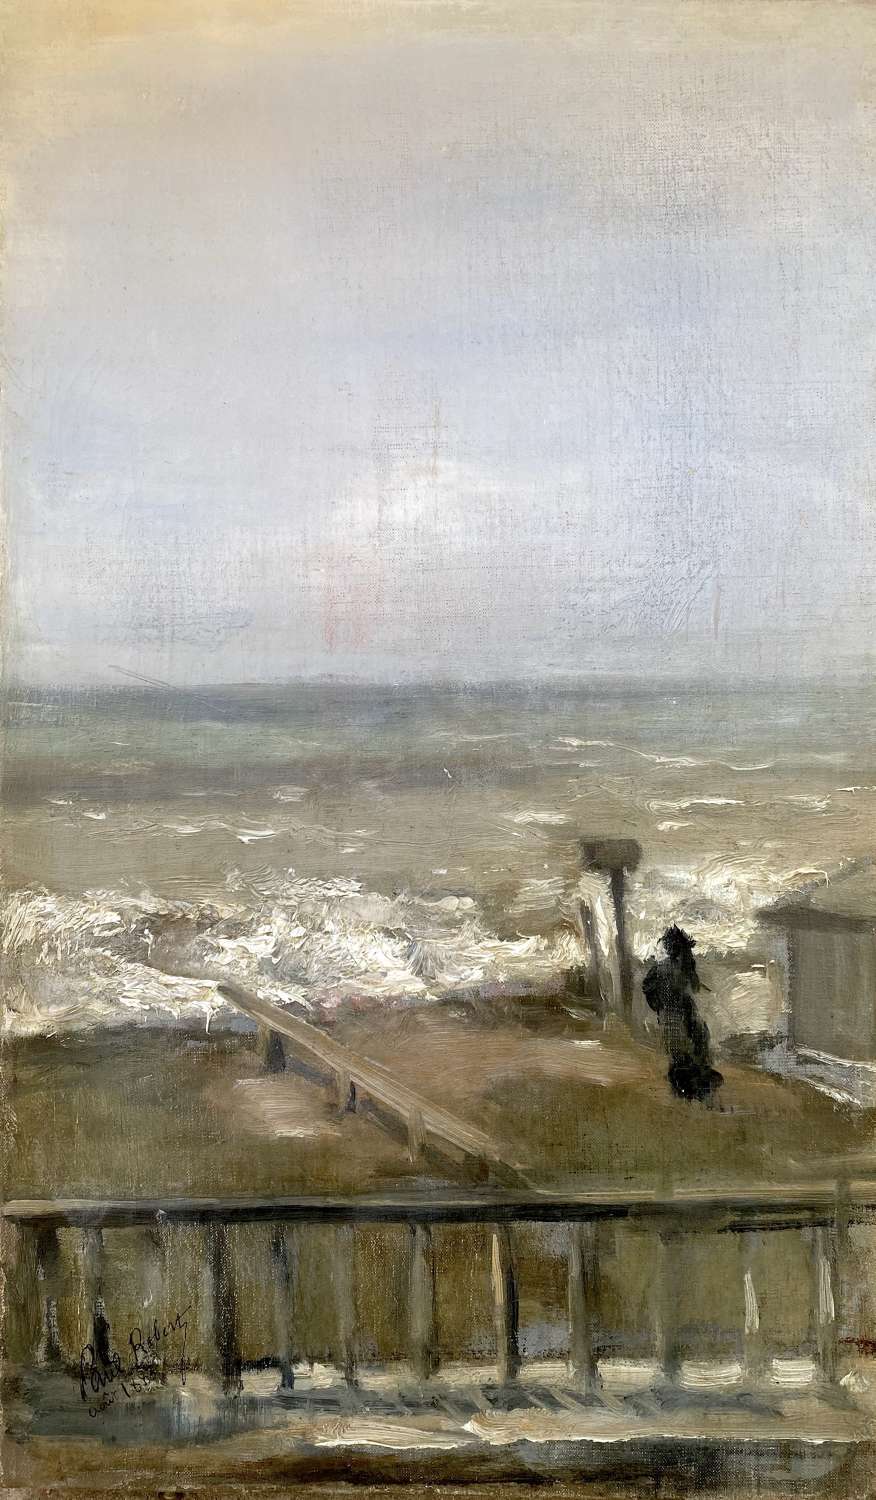 The Woman on the beach,1883: early Impressionist coastal landscape